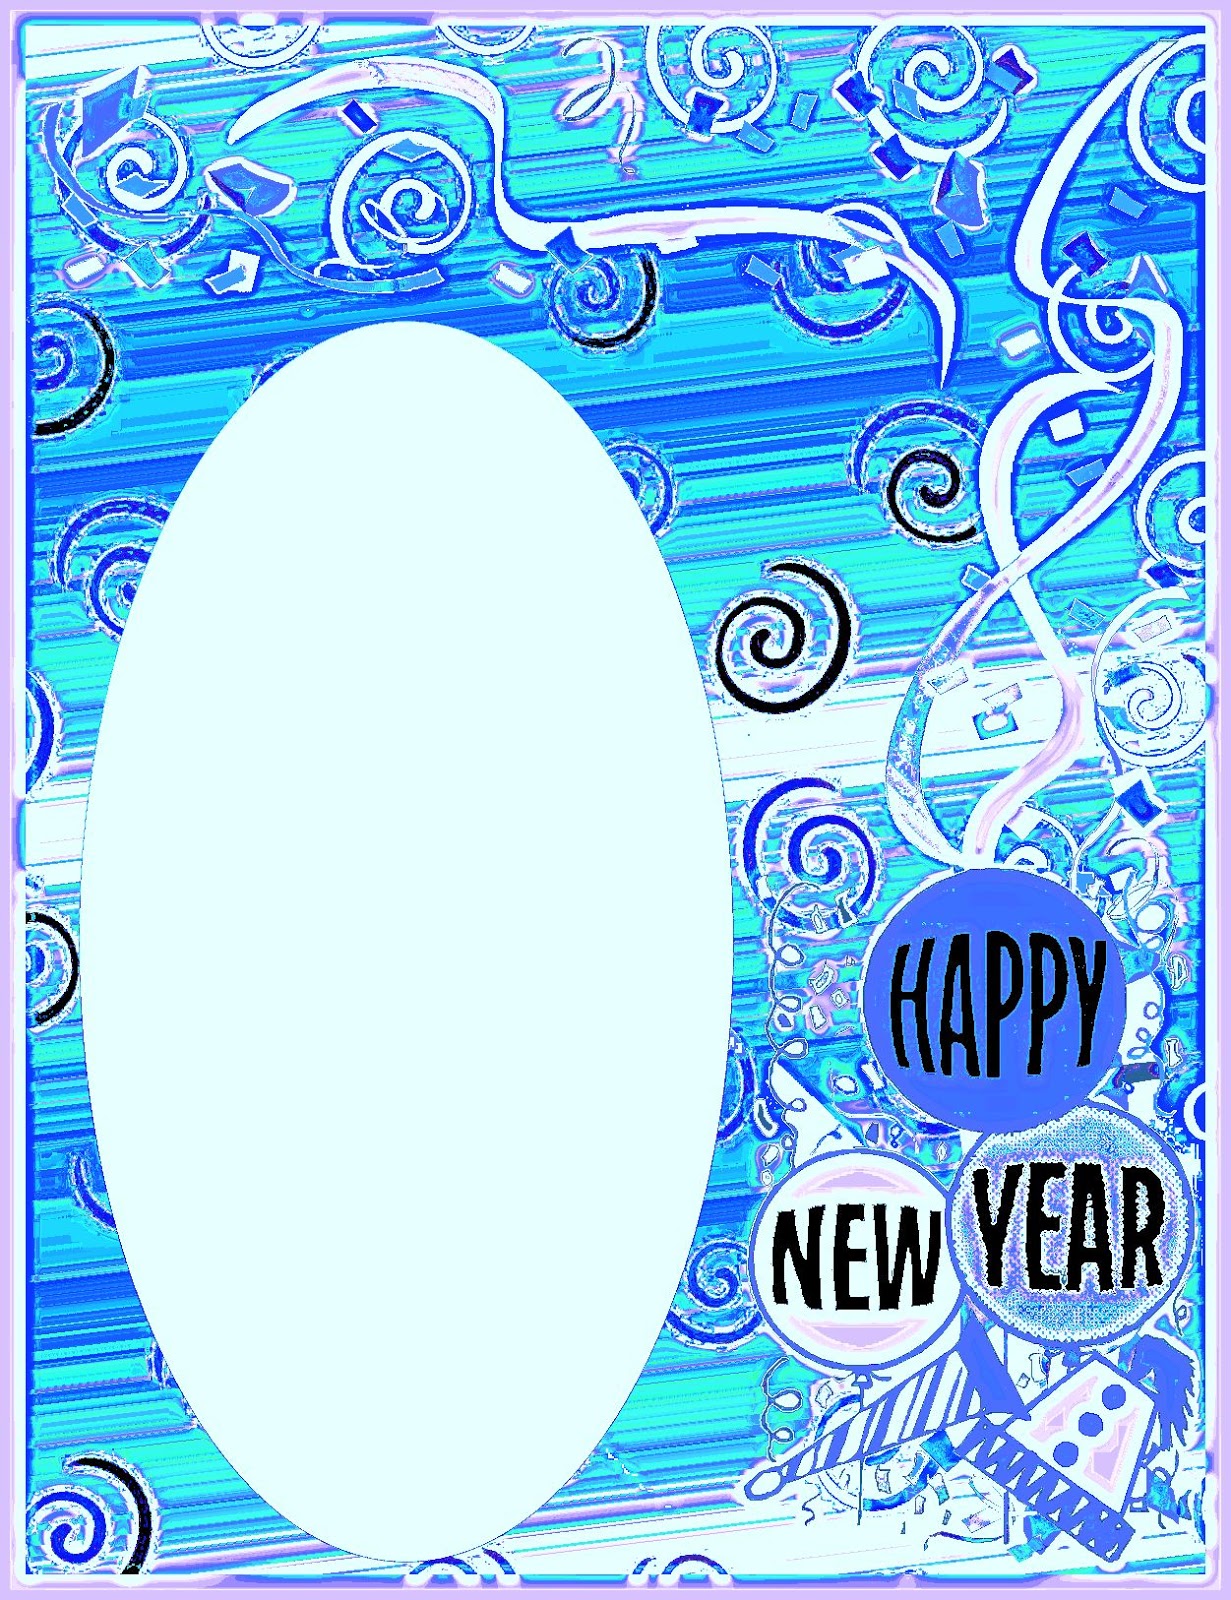 christian clip art for new years eve - photo #25